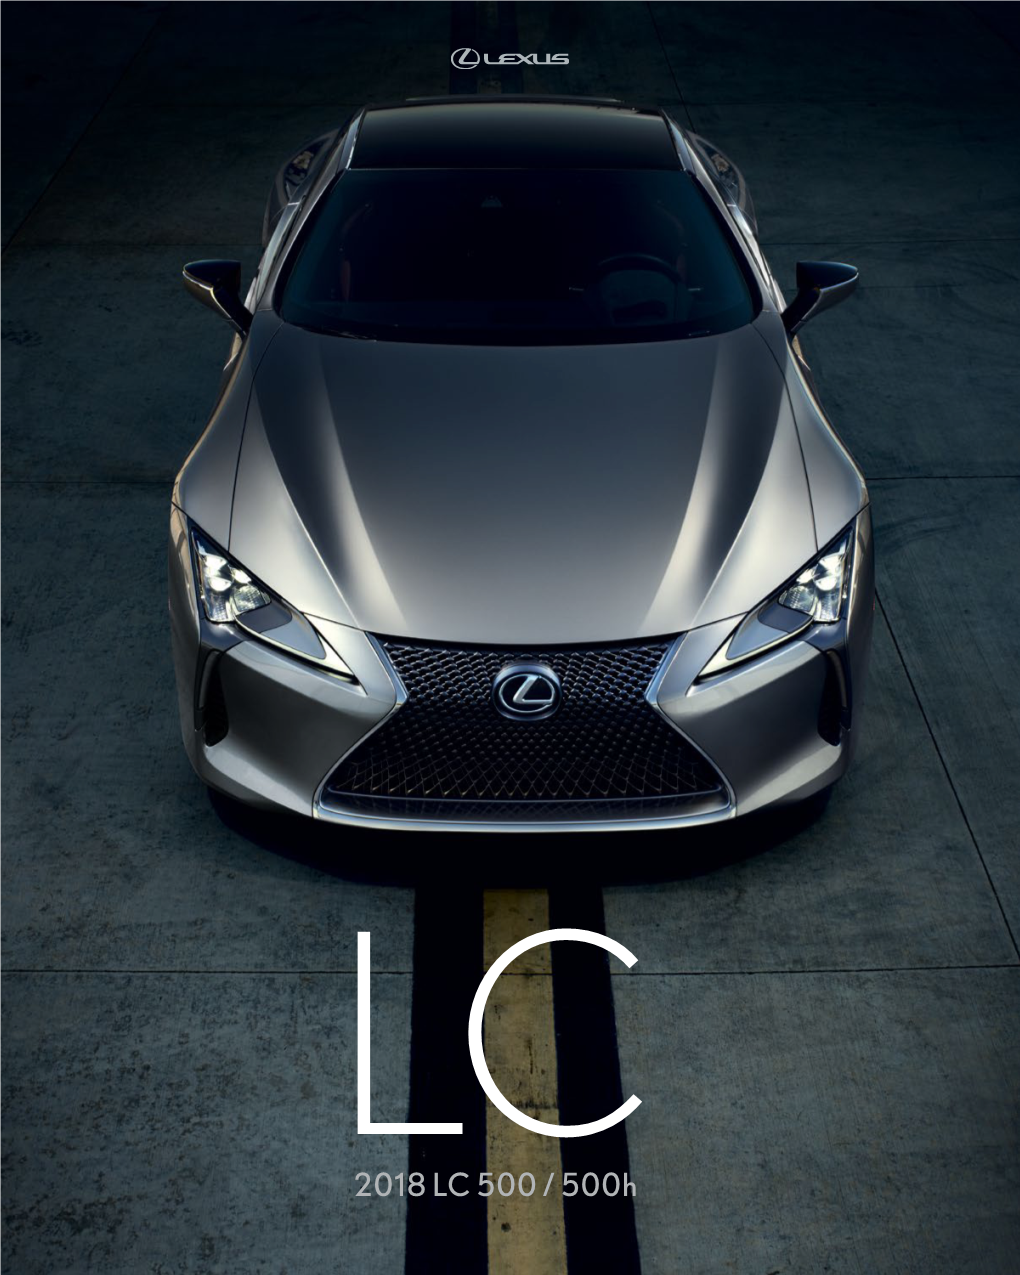 Brochure for 2018 Lexus LC and LC Hybrid